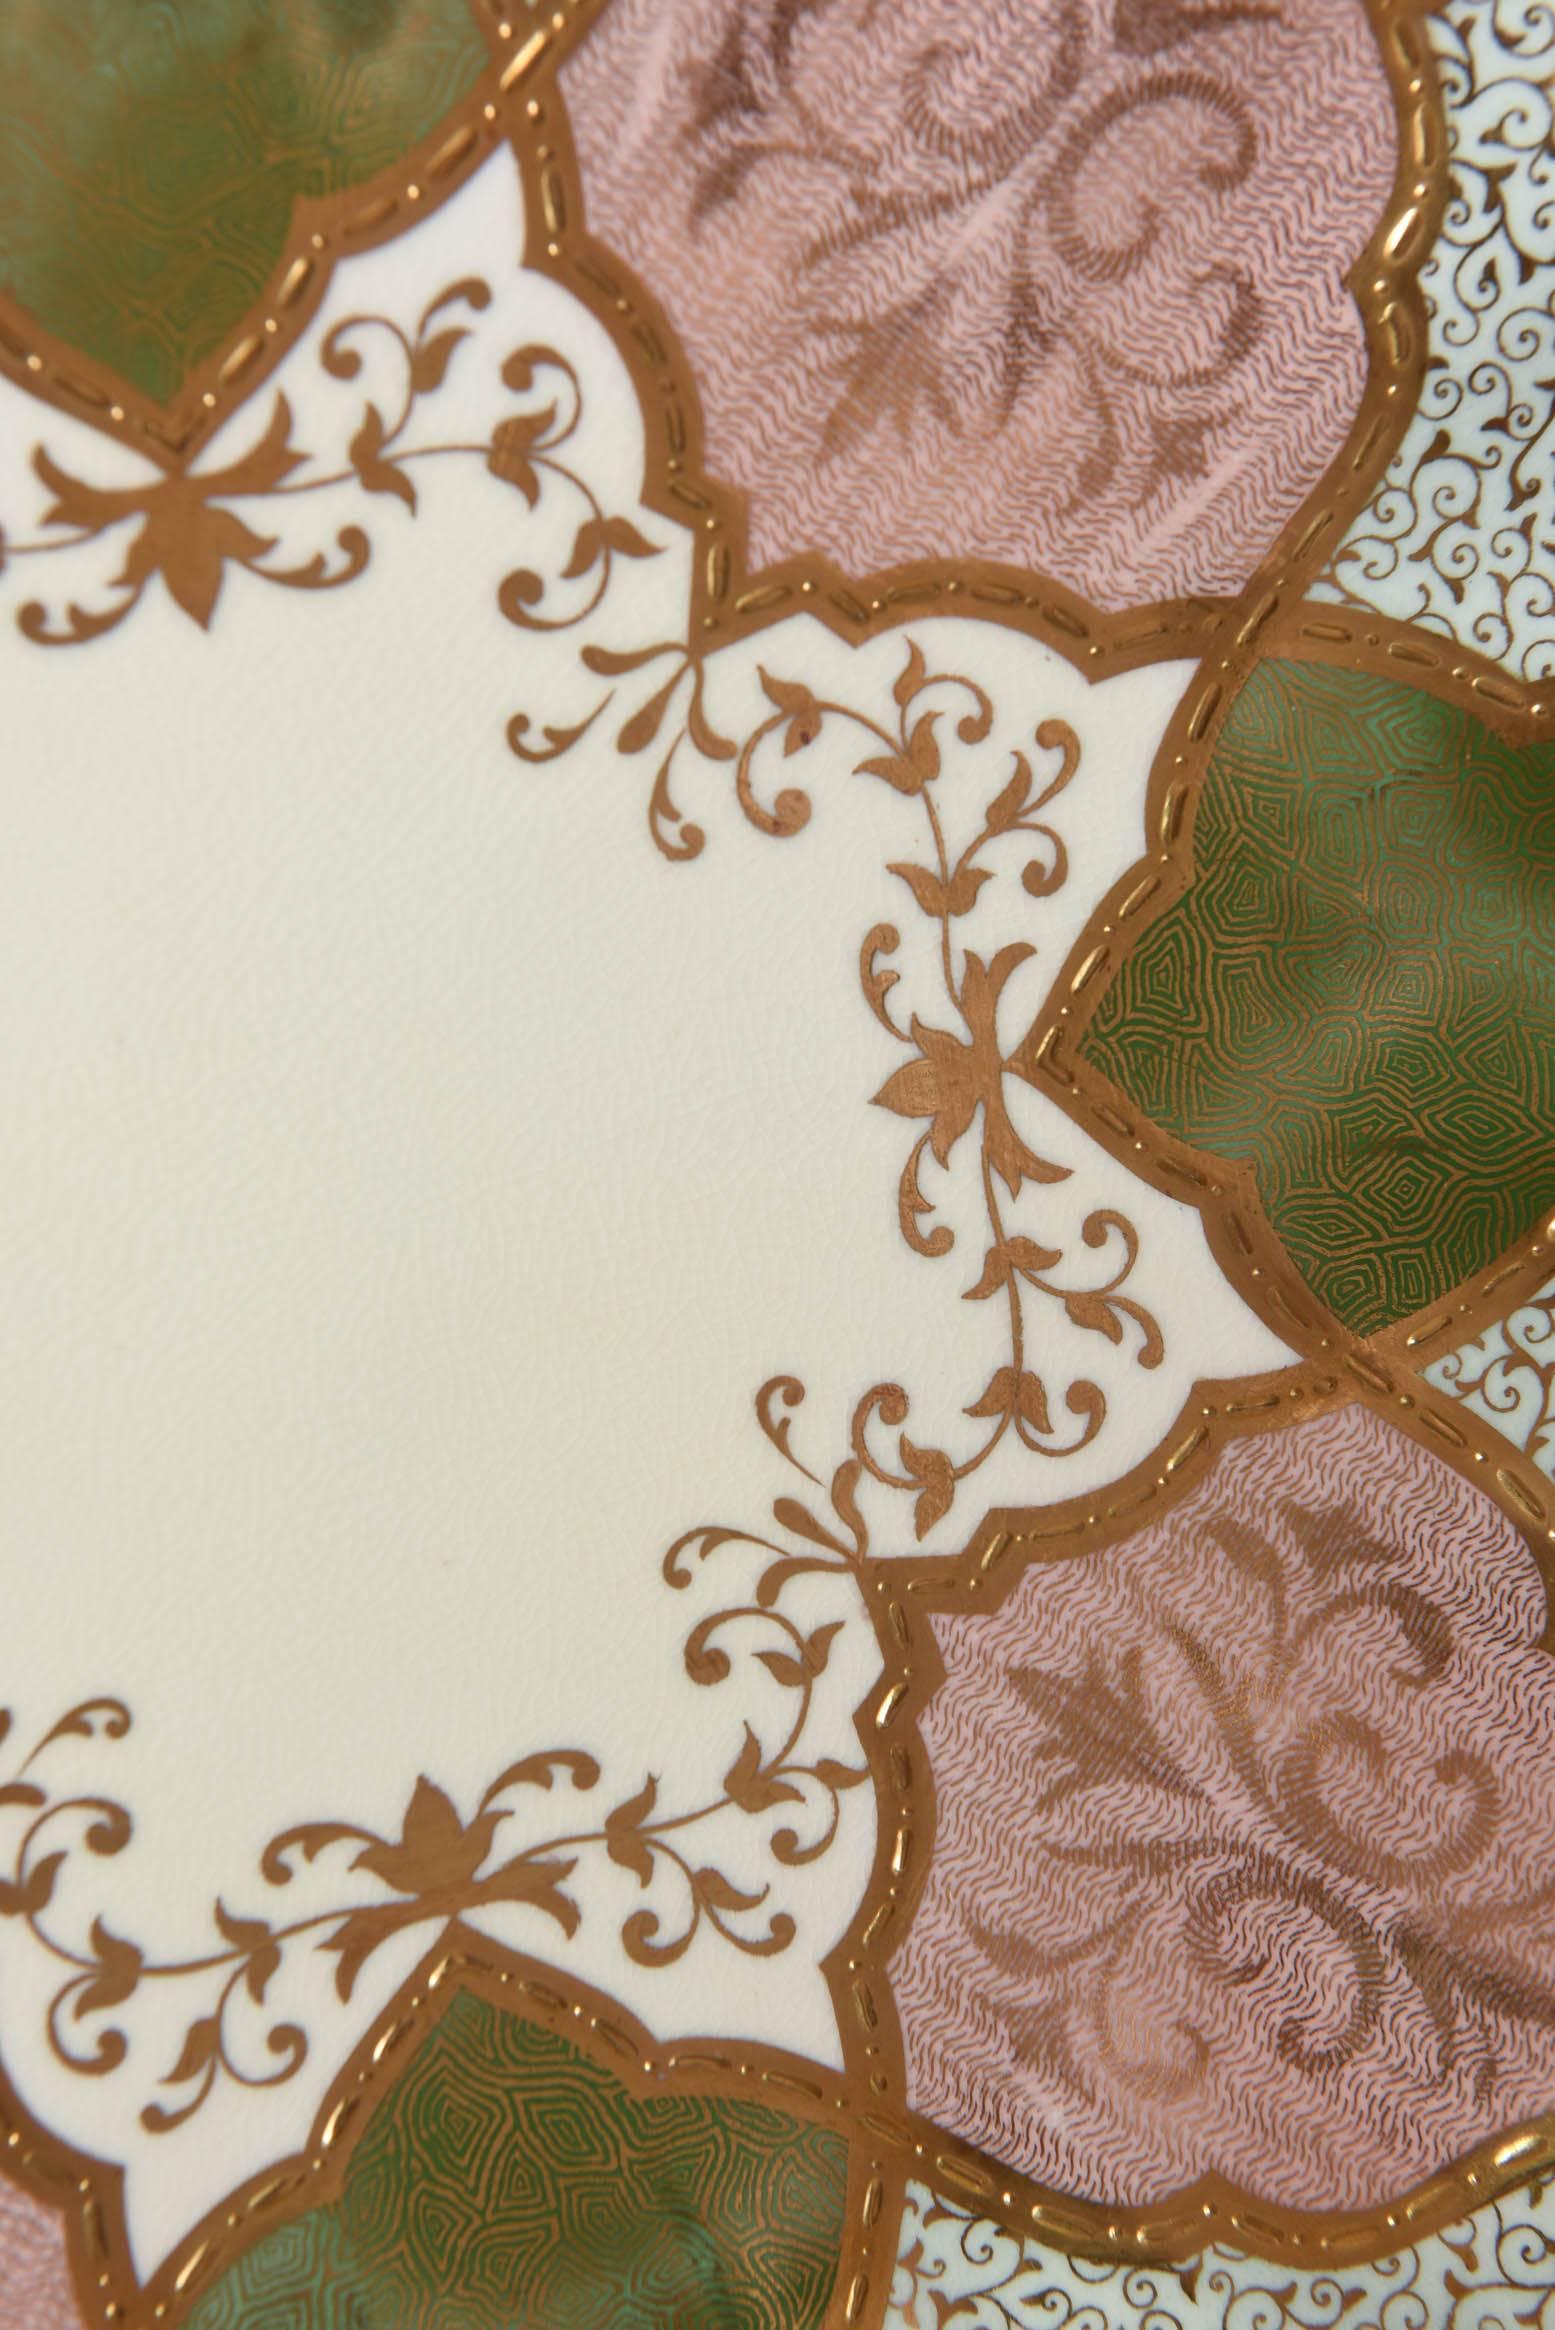 Hand-Crafted 12 Exquisite and Stunning Plates, Pink and Green, Raised Gilt Encrusted, Scallop